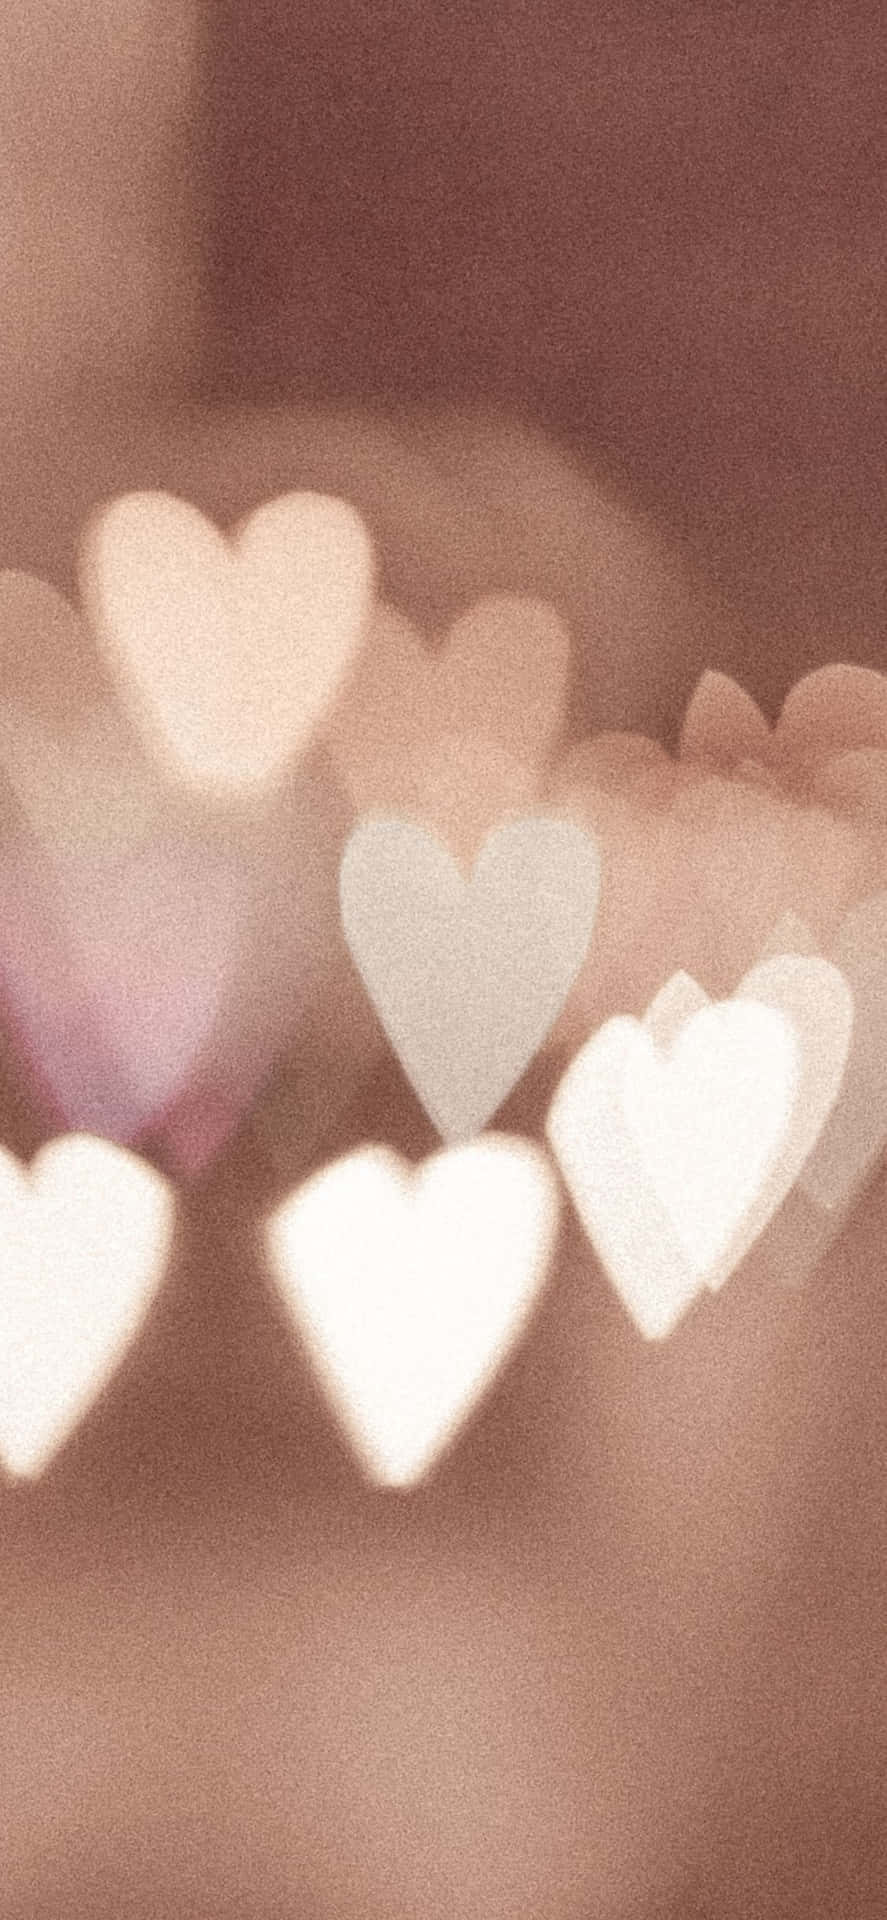 A Blurry Image Of Hearts In A Blurry Background Wallpaper